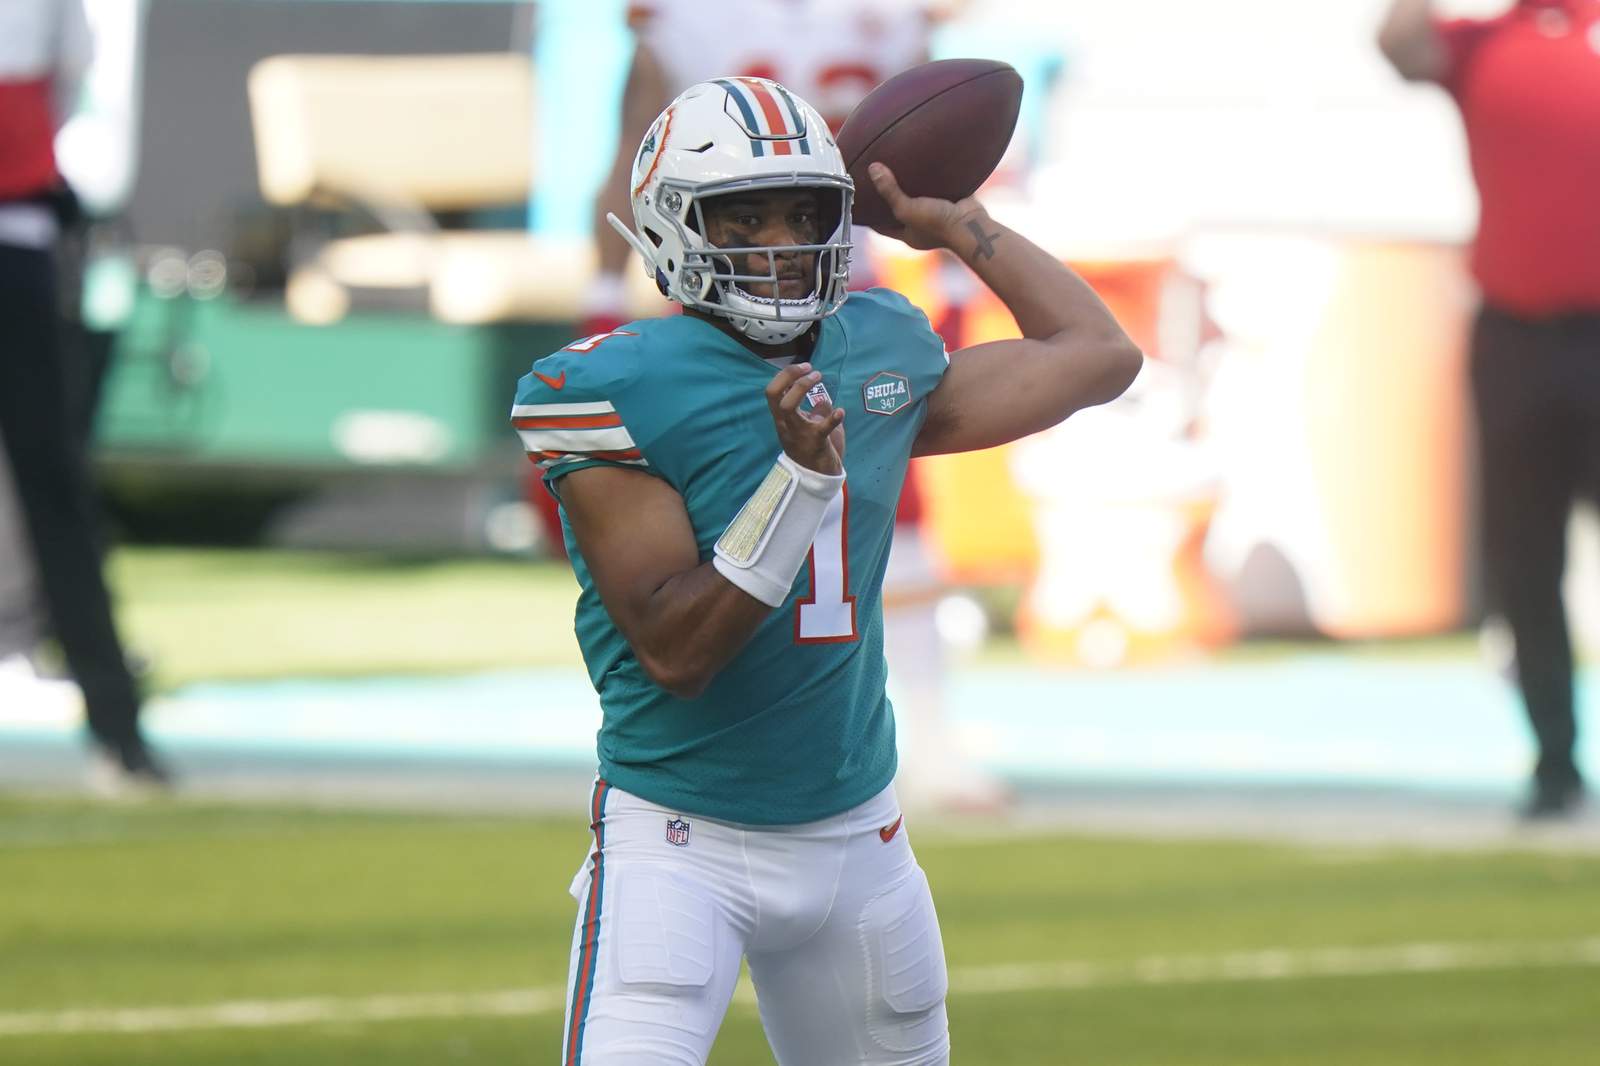 Dolphins vs. Patriots: How to watch, stream, listen